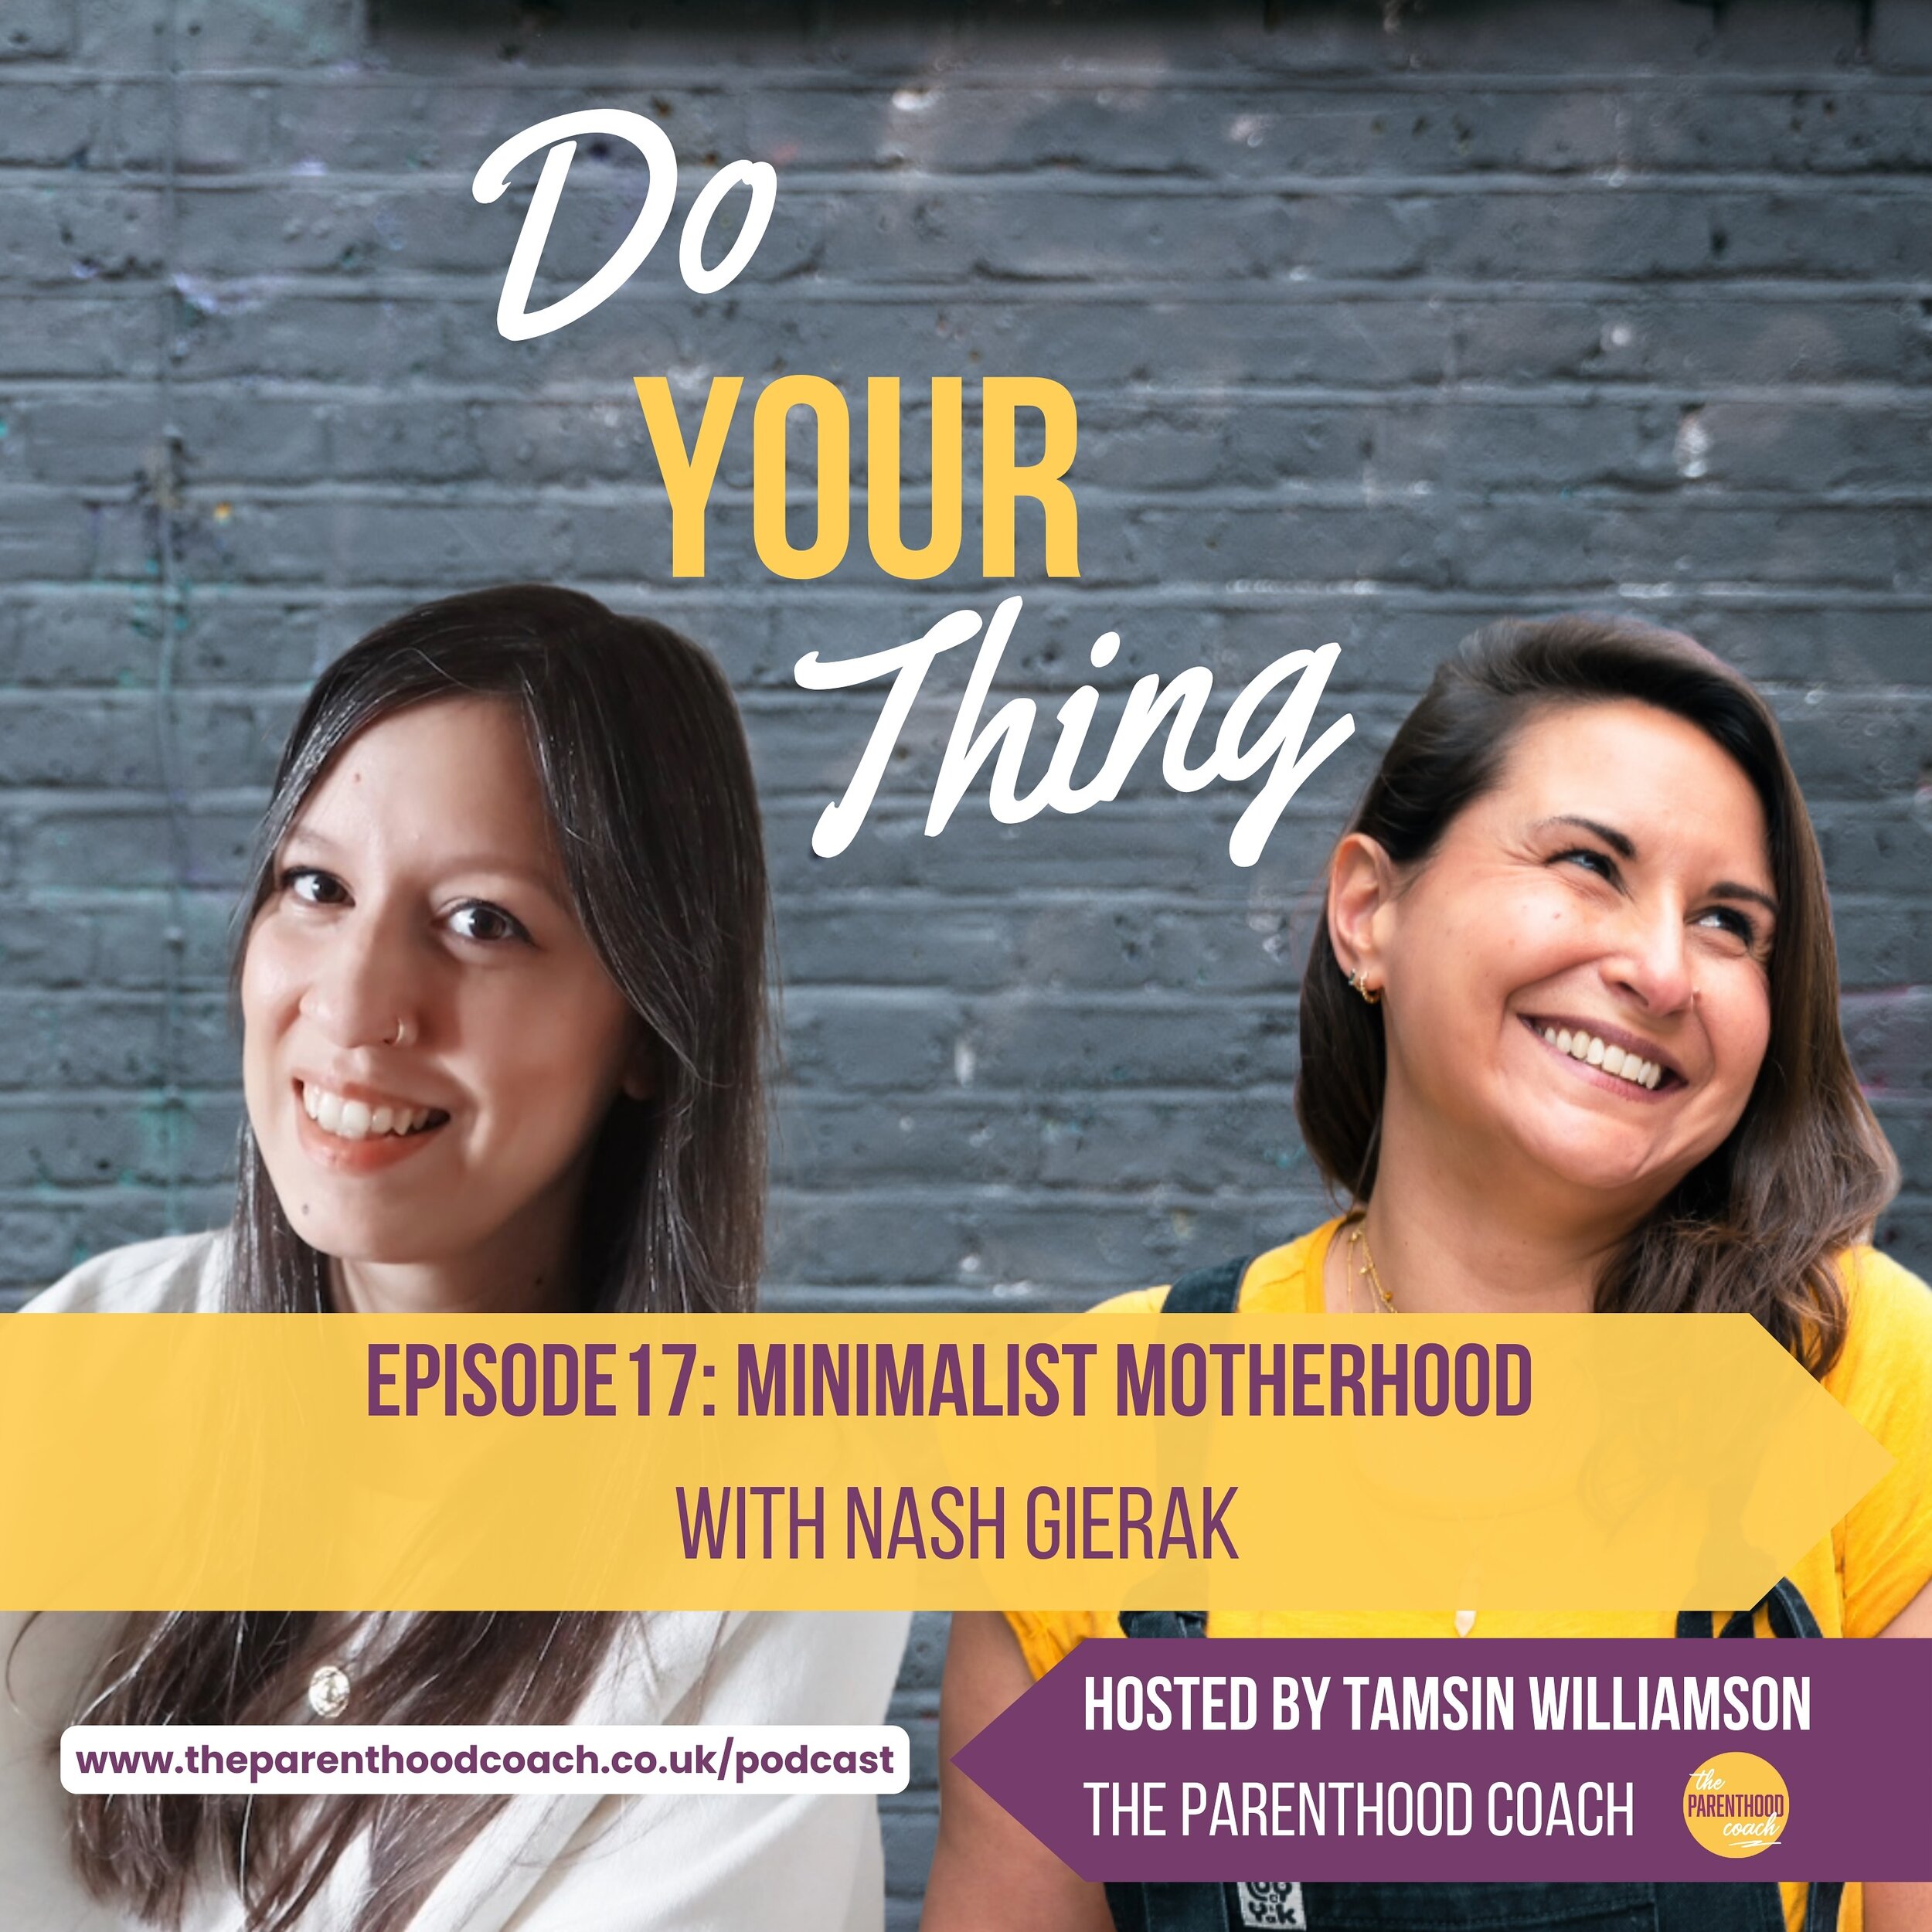 🎧 EPISODE 17 - Minimalist Motherhood with Nash Gierak🎧

What a fabulous convo this was with the wonderful Nash Gierak @boldgreenstrategies all about how she navigates parenthood while honouring her passion for sustainability ♻️ 

Nash is a Mum of 2